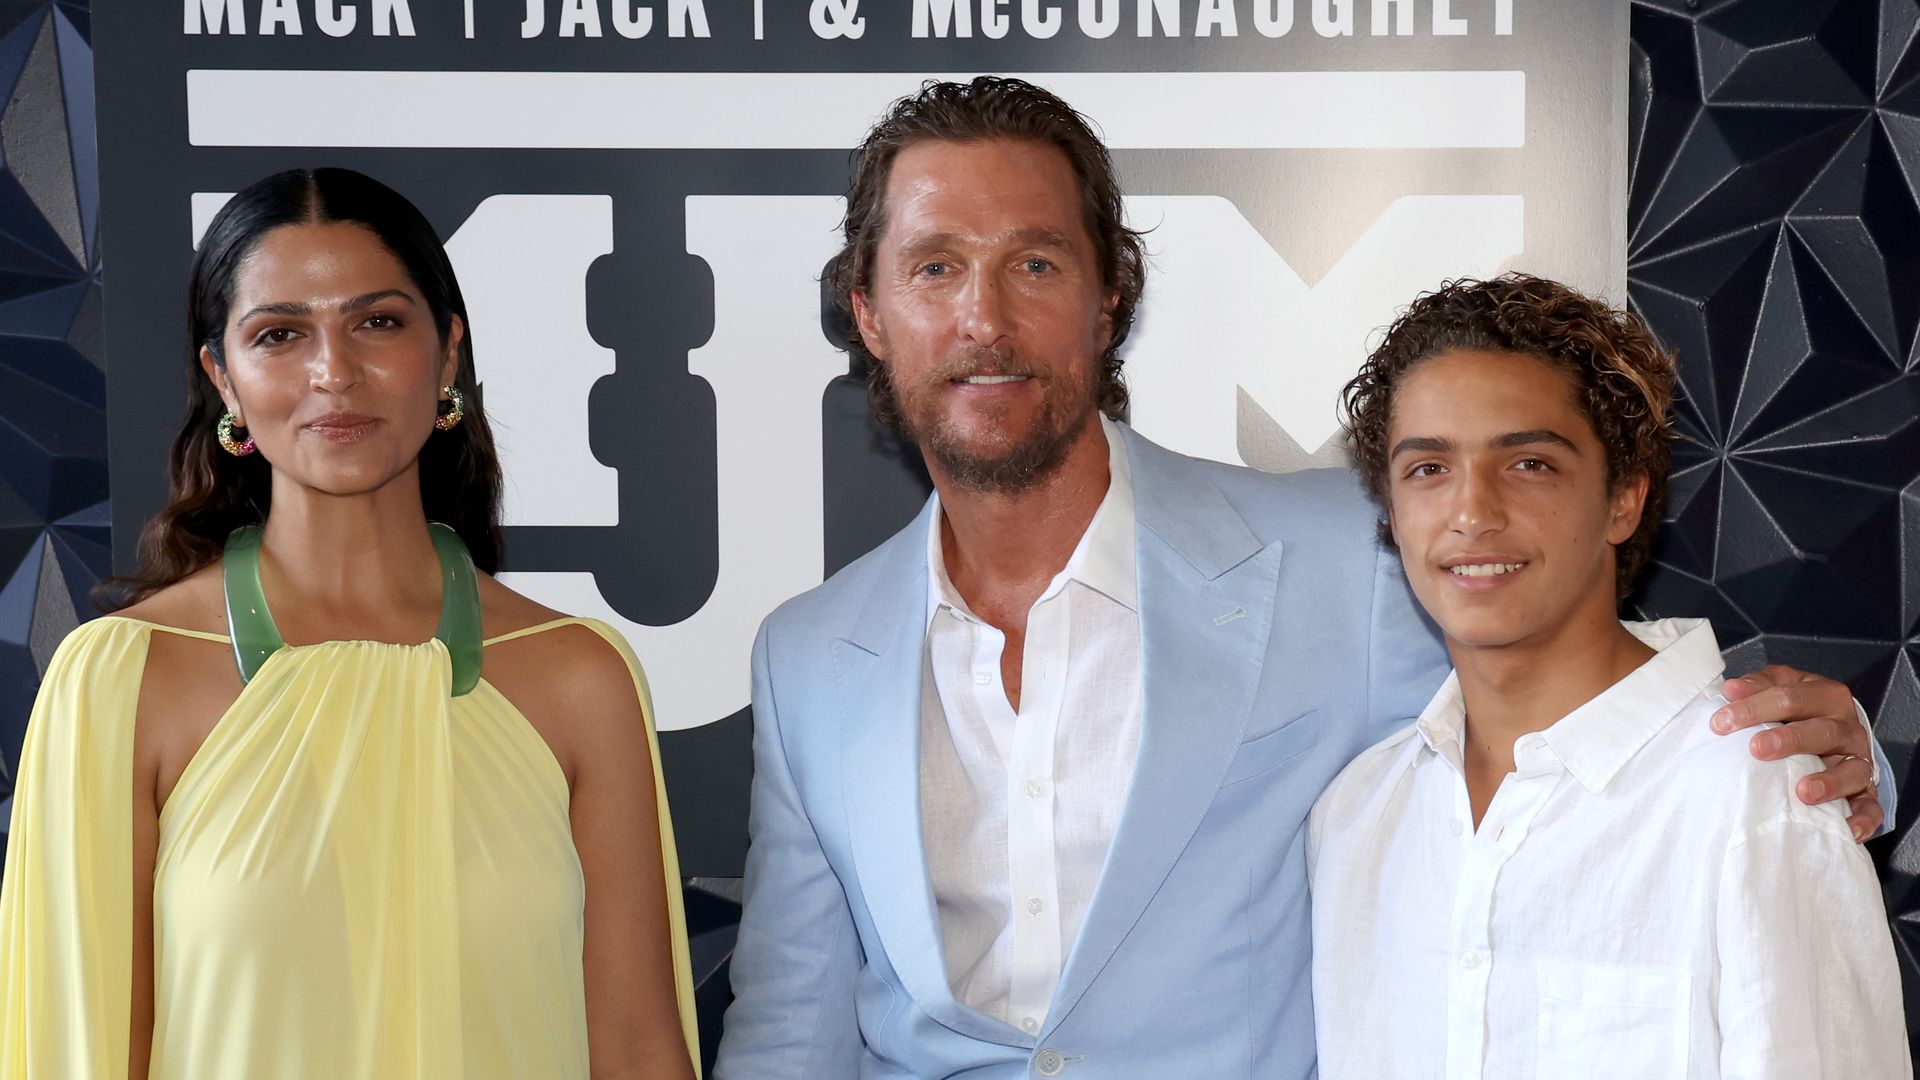 Matthew McConaughey marks son Levi's 'independence' with bittersweet milestone moment